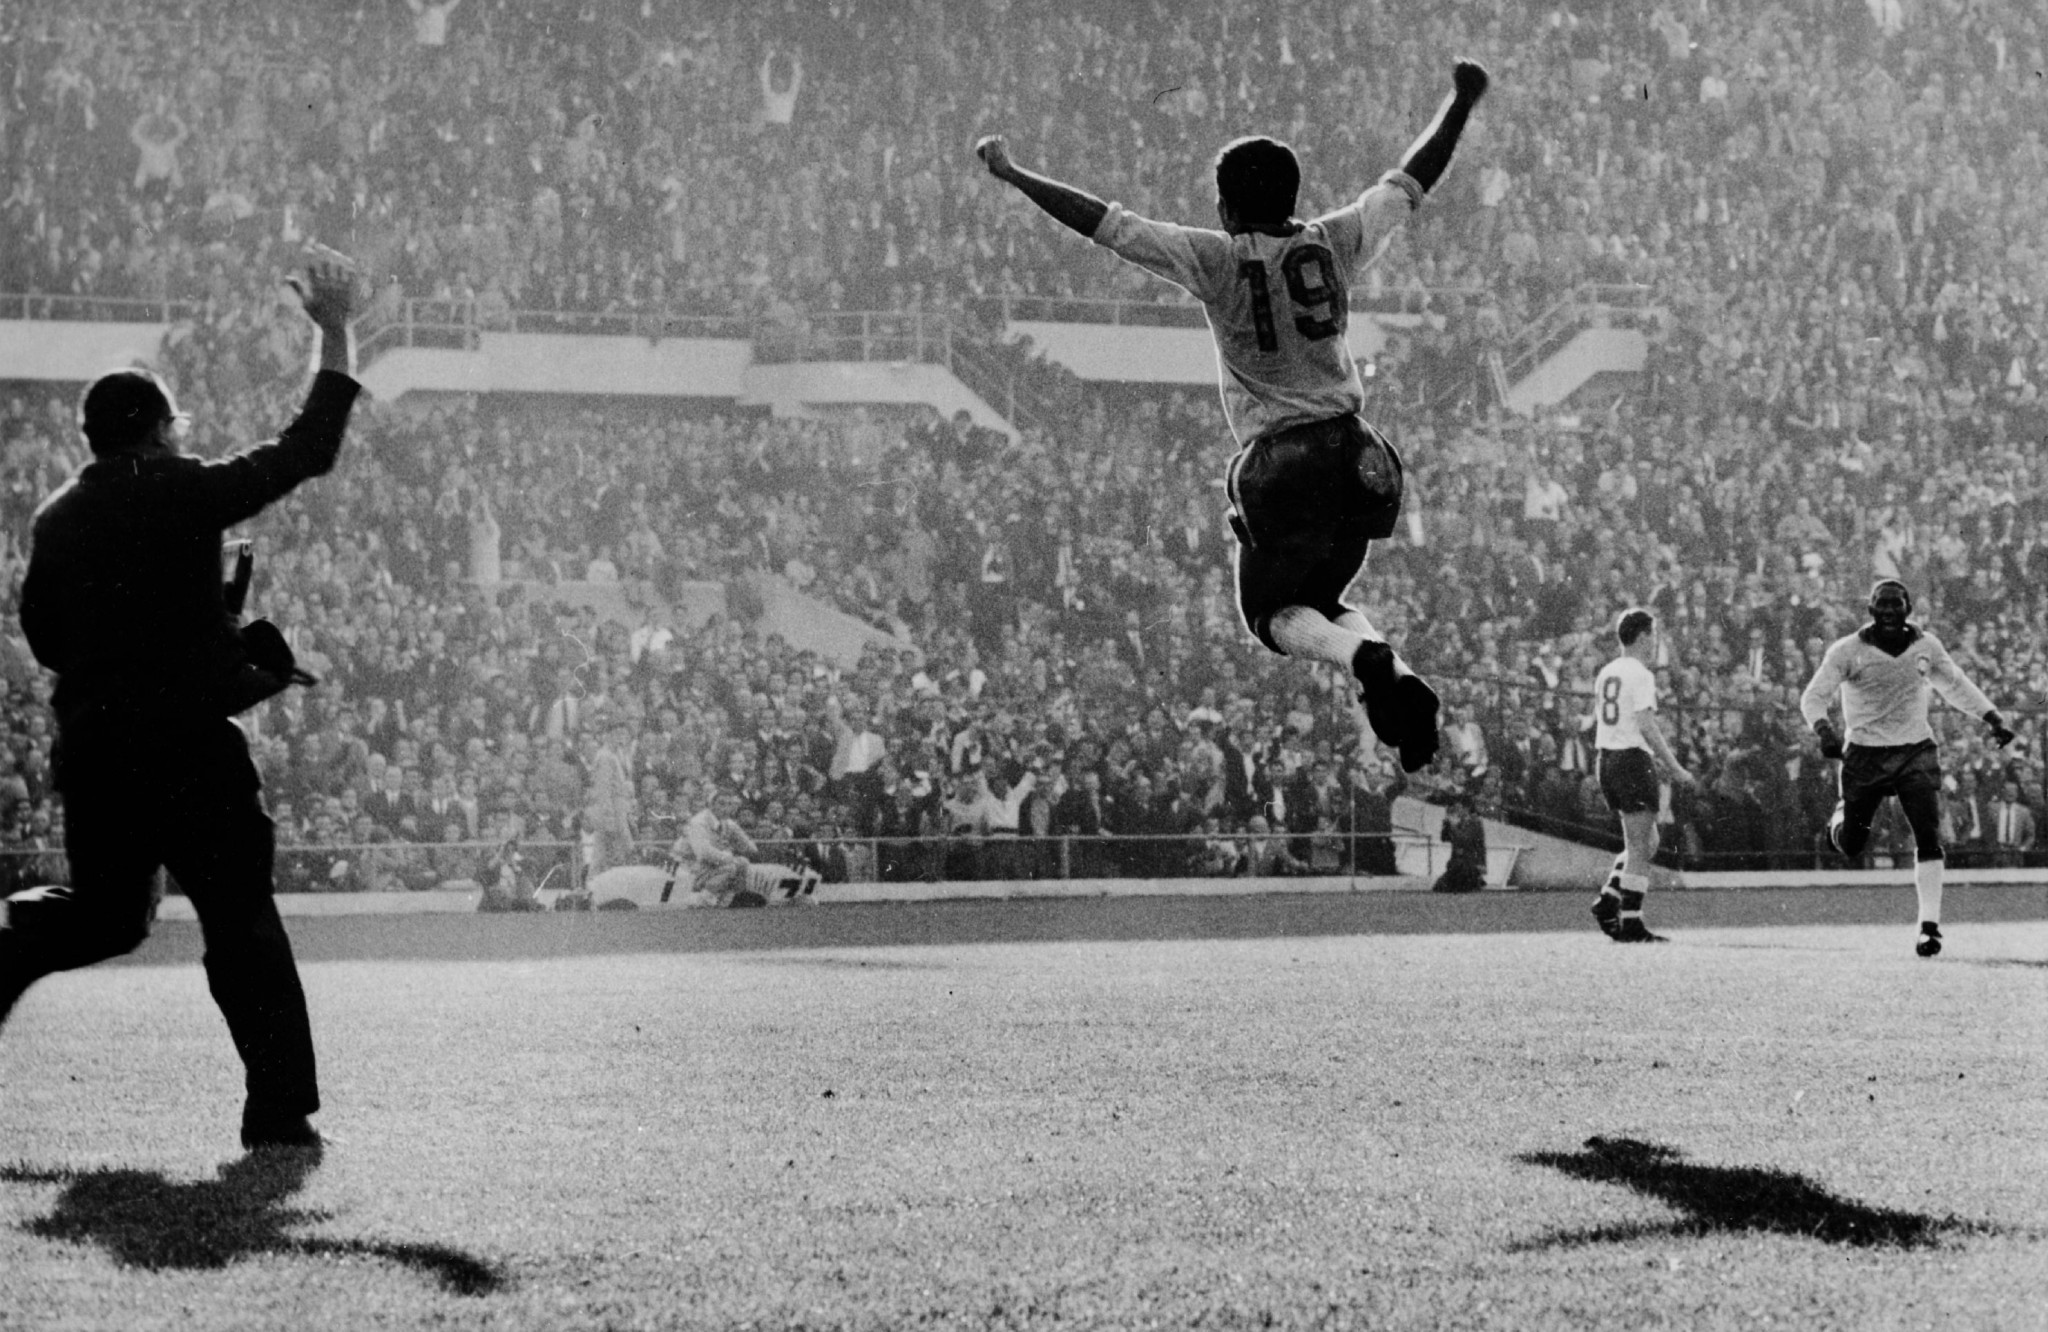 Led by Zito, Brazil became the first South American country to win successive World Cups in 1962 ©Getty Images